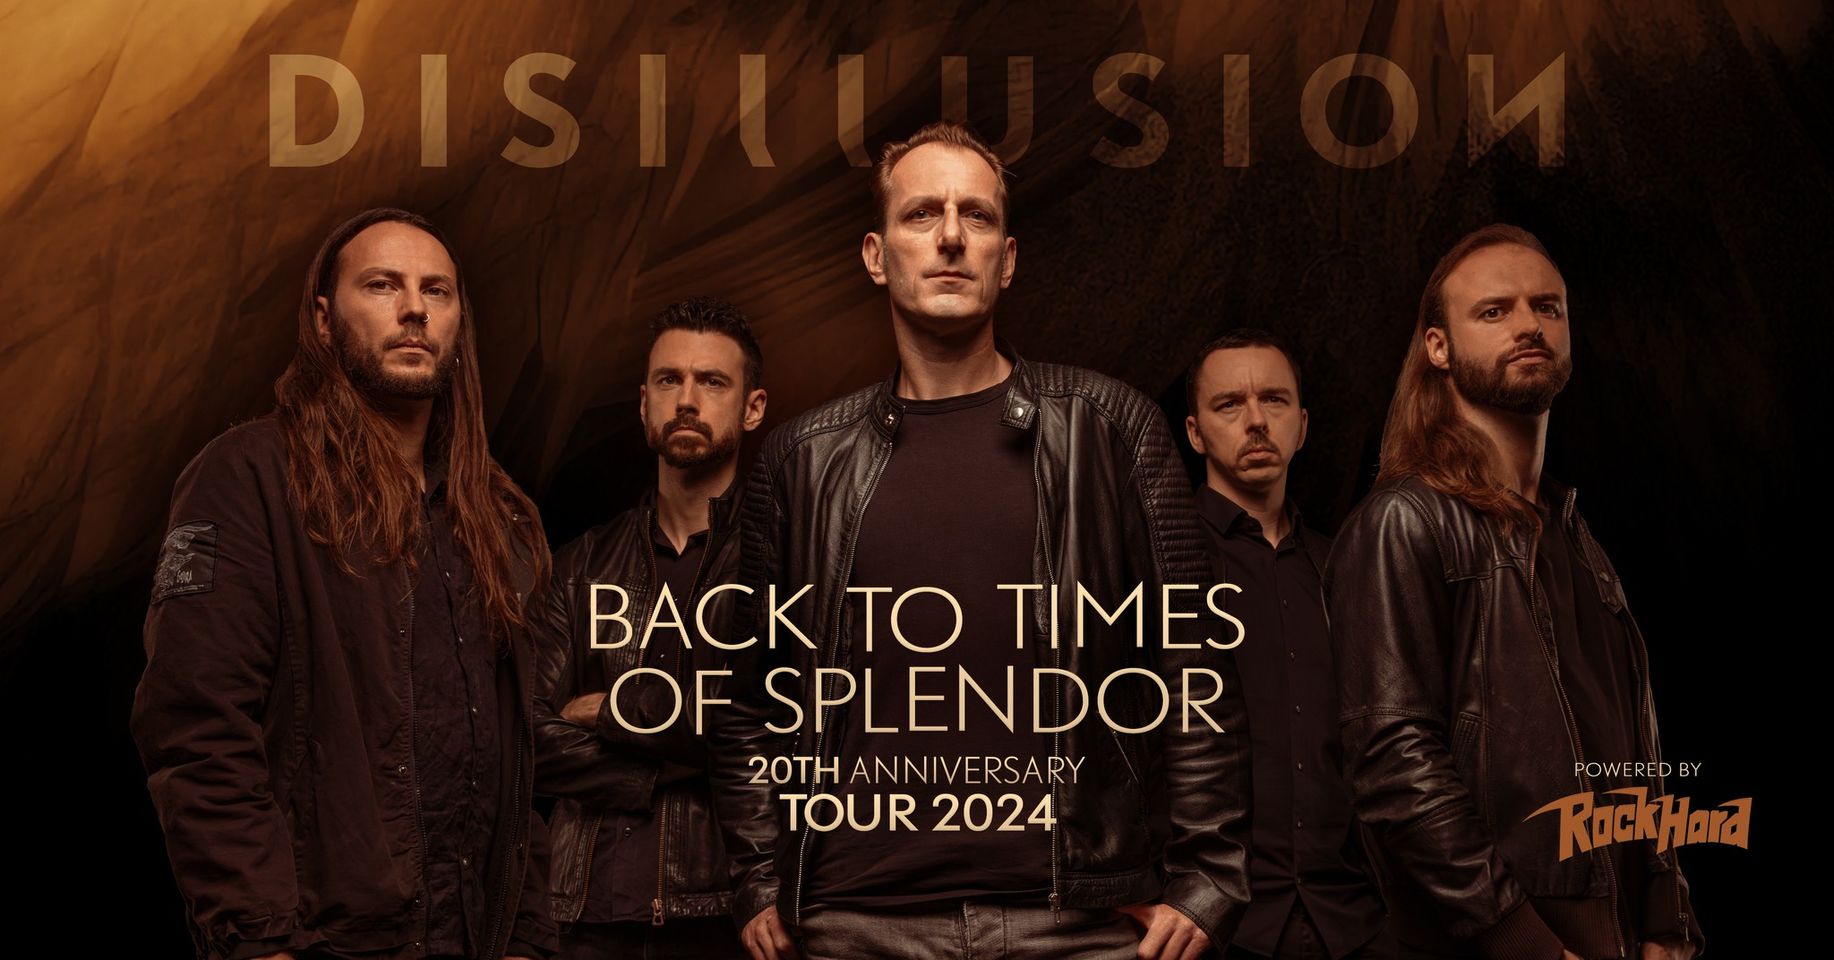 Back To Times Of Splendor am 4. May 2024 @ Viper Room.